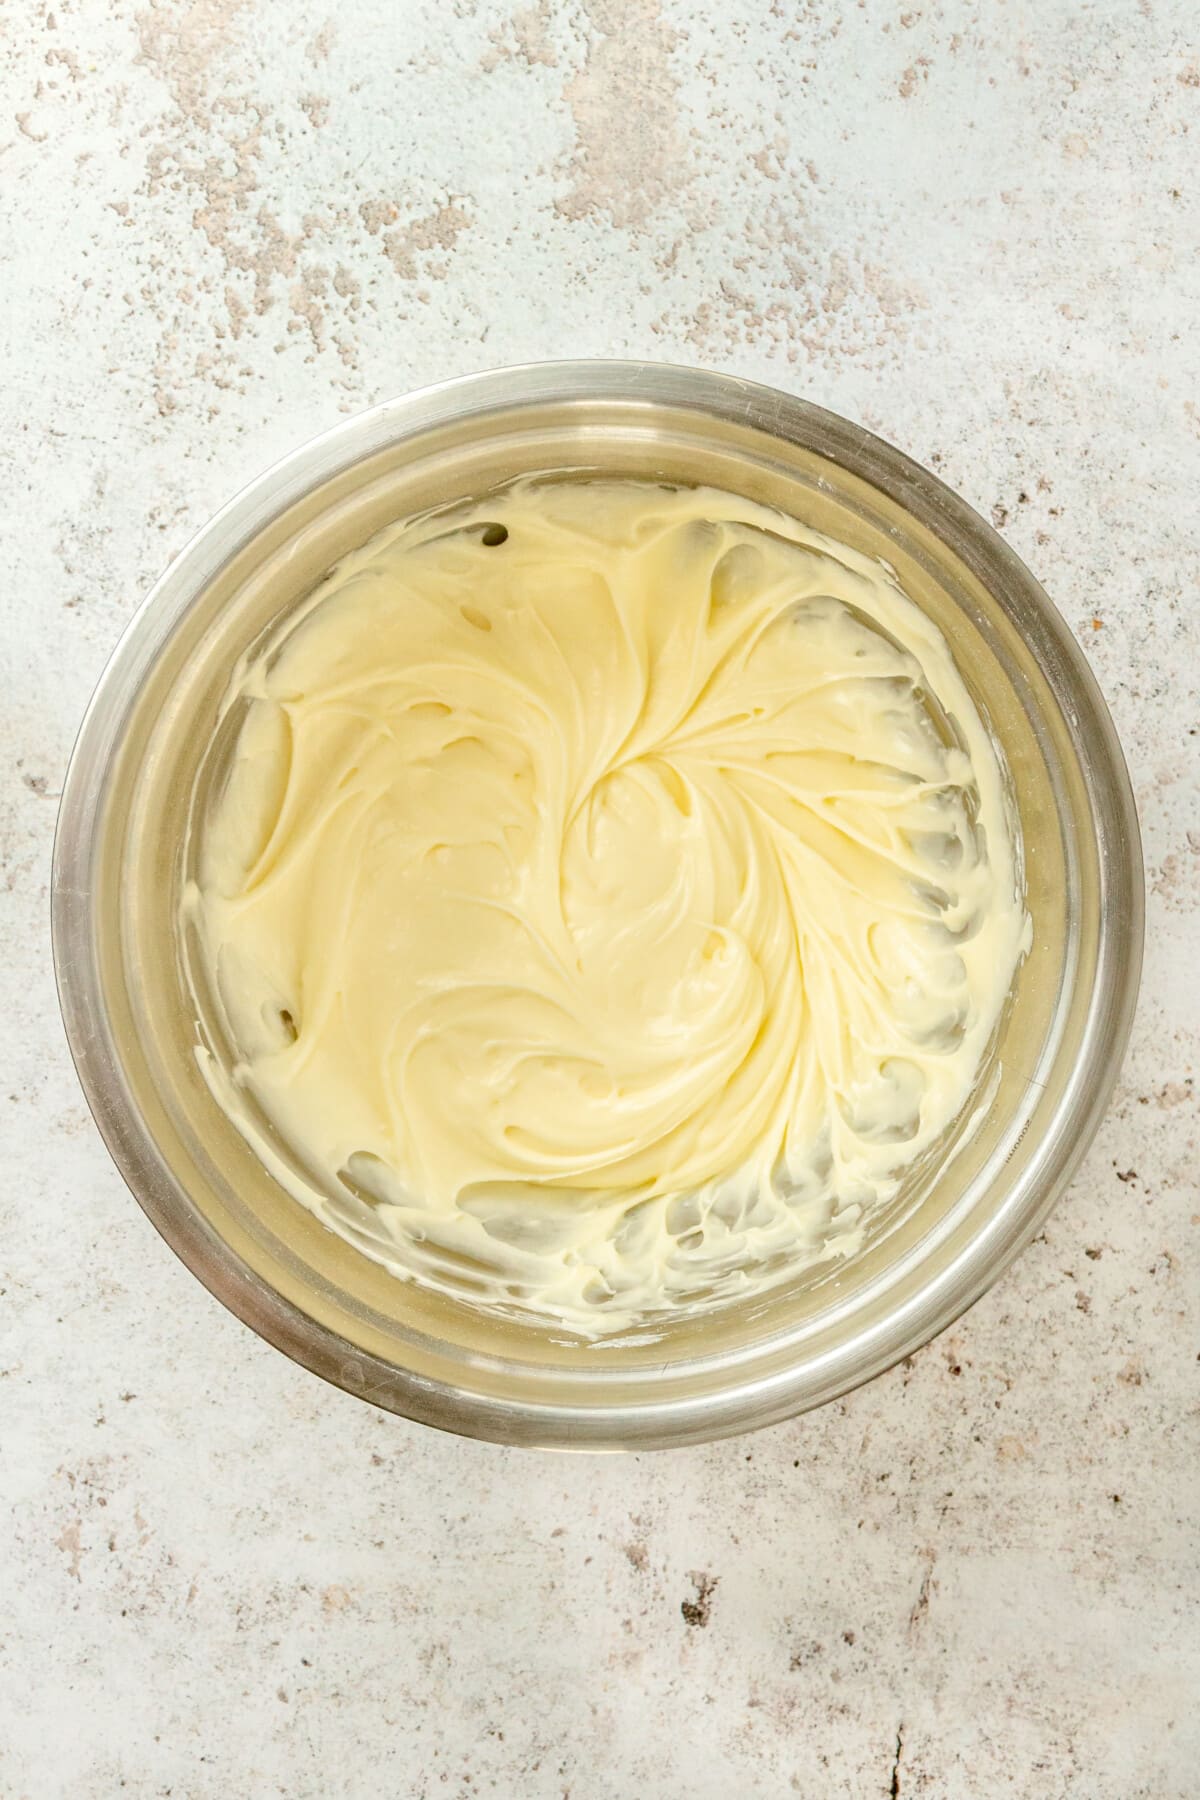 Cream cheese icing sits in a large metal mixing bowl.